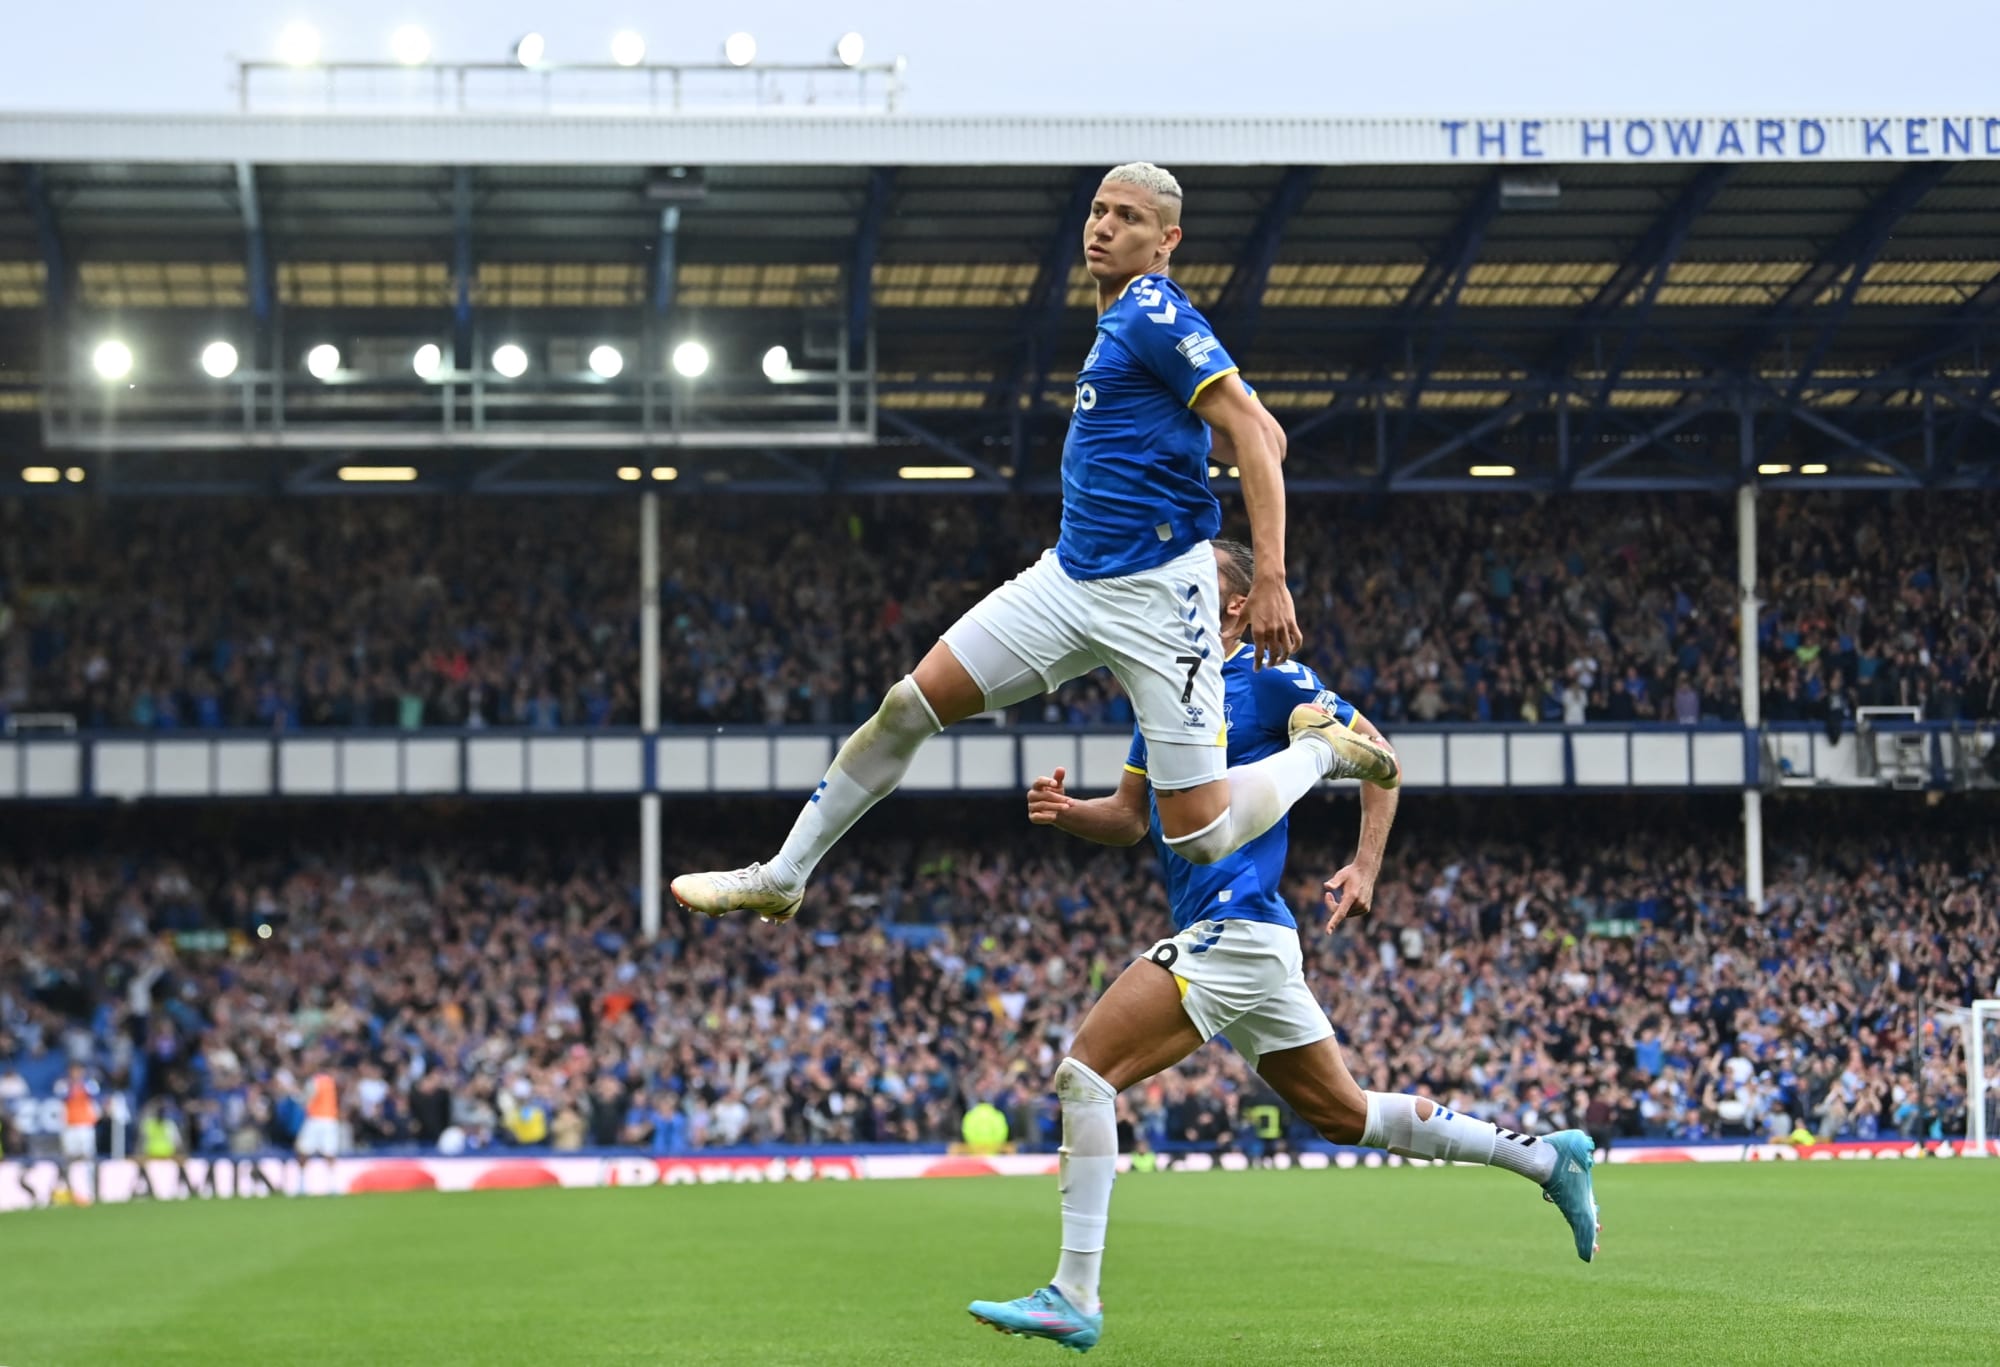 Tottenham have signed Richarlison from Everton for reported £60 million